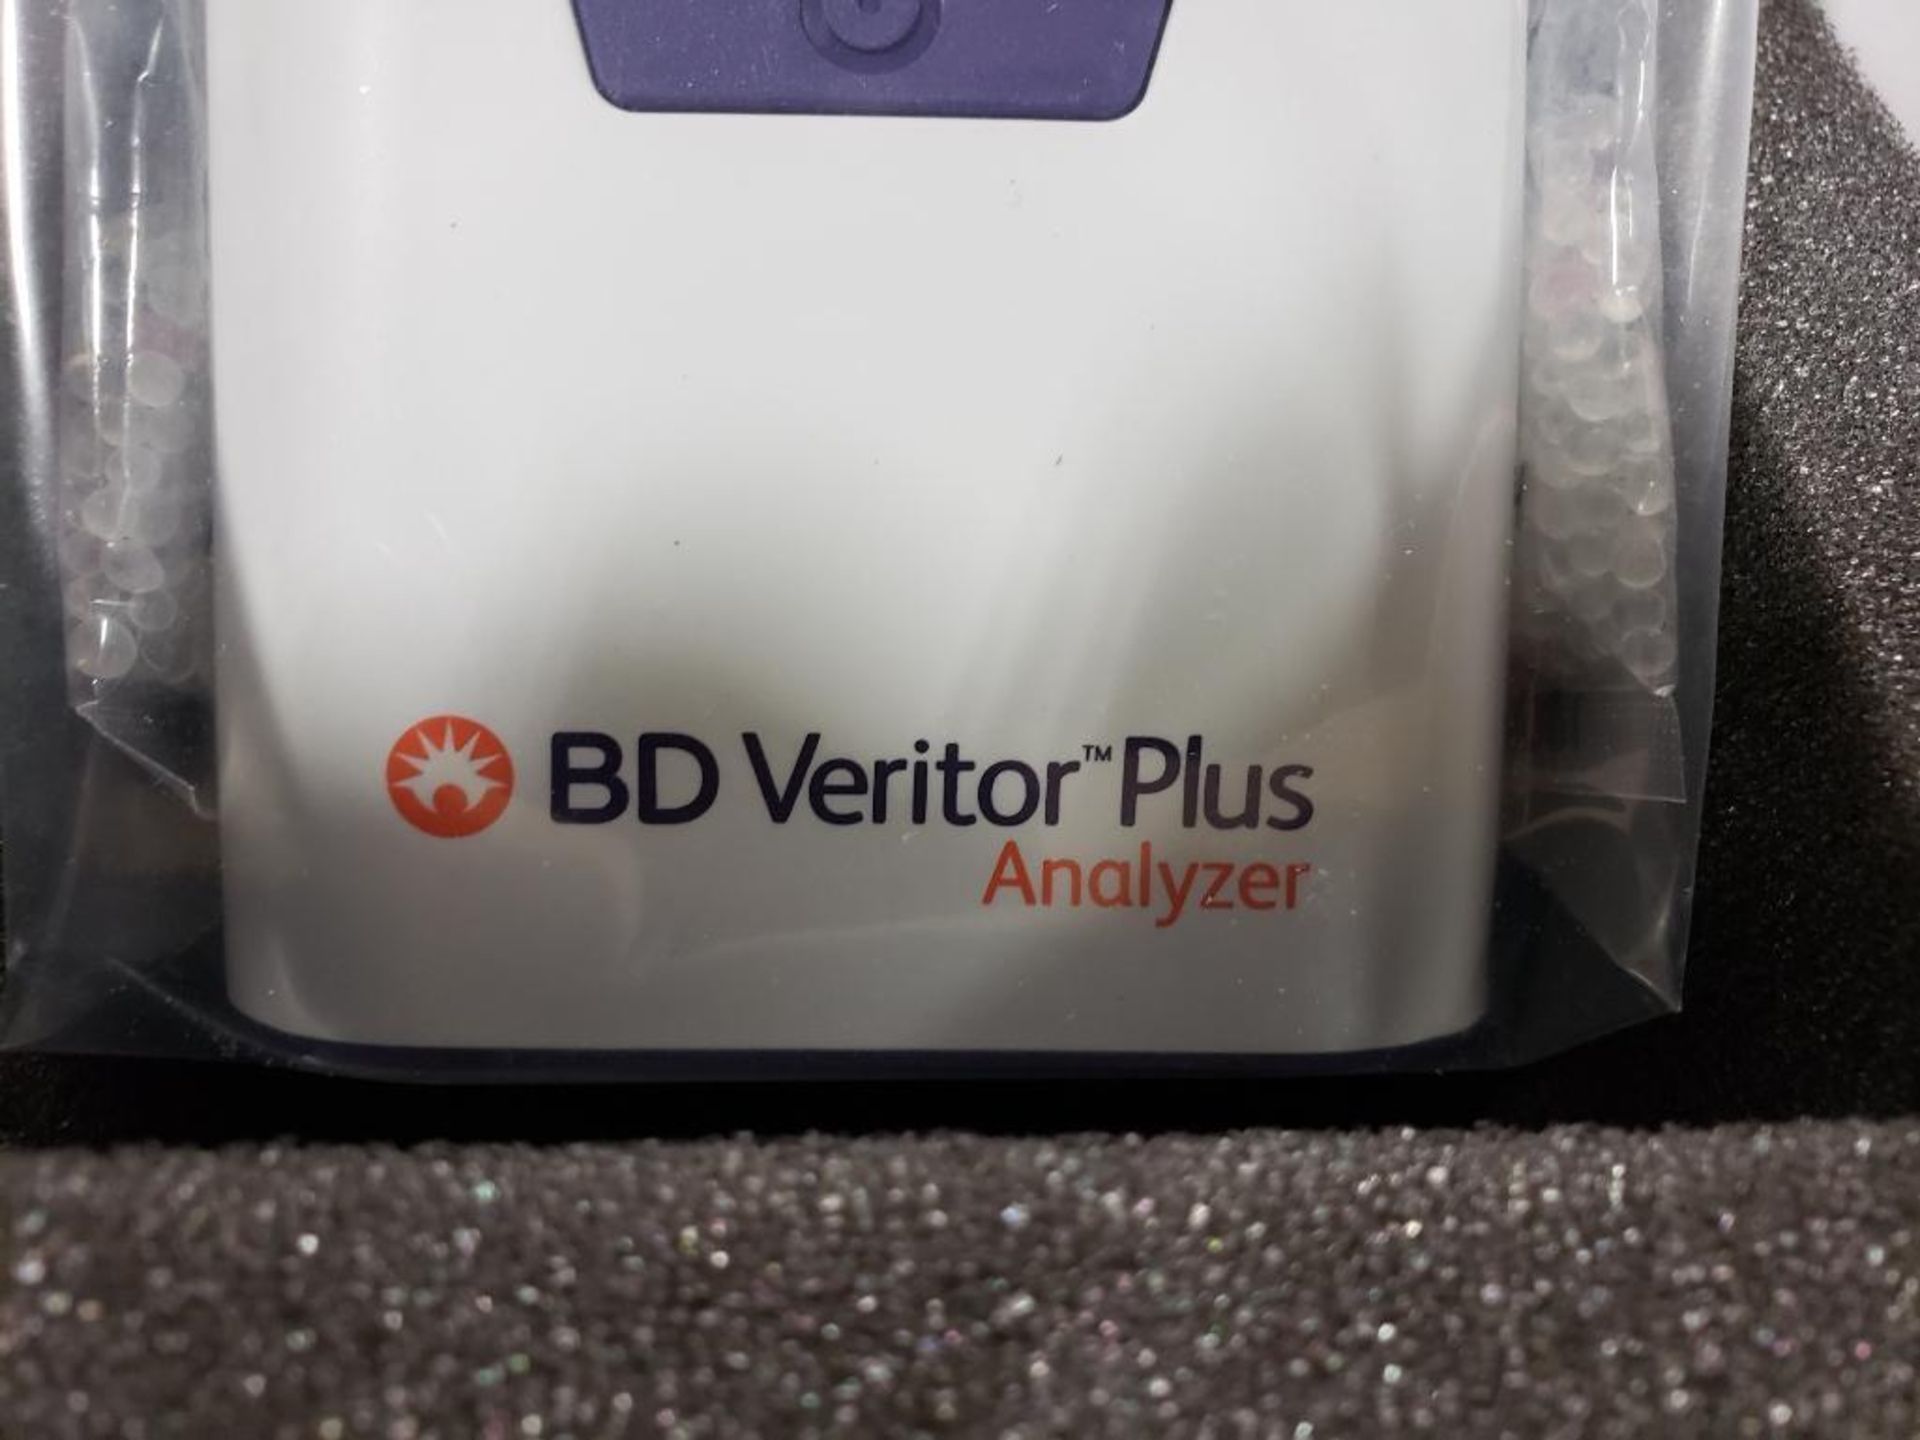 BD Veritor Plus analyzer. Appears new in box. - Image 3 of 7